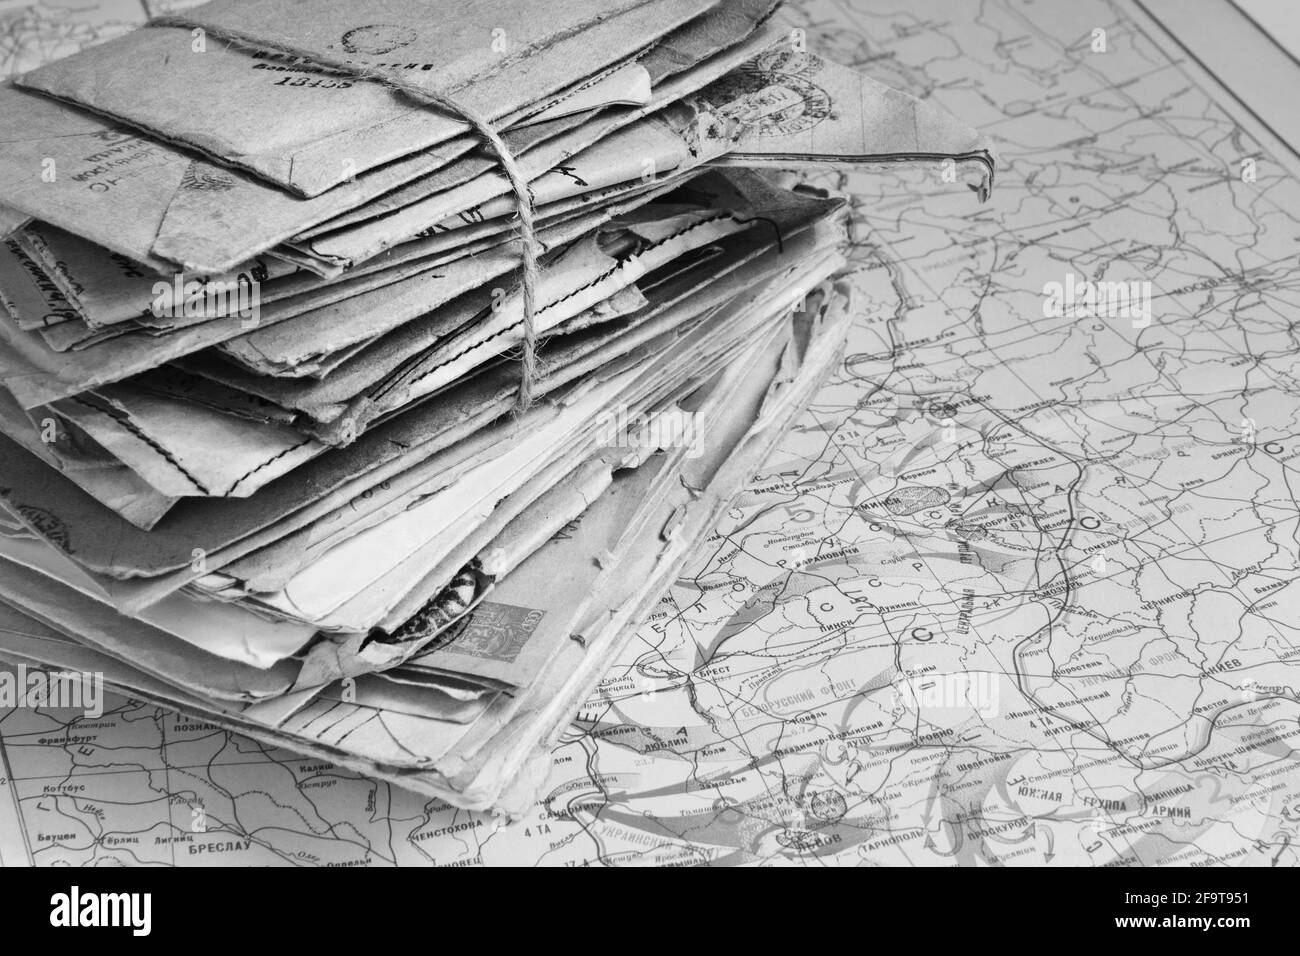 Sheaf of the paper letters on the military map of the World War II in Europe, 1944, black and white Stock Photo